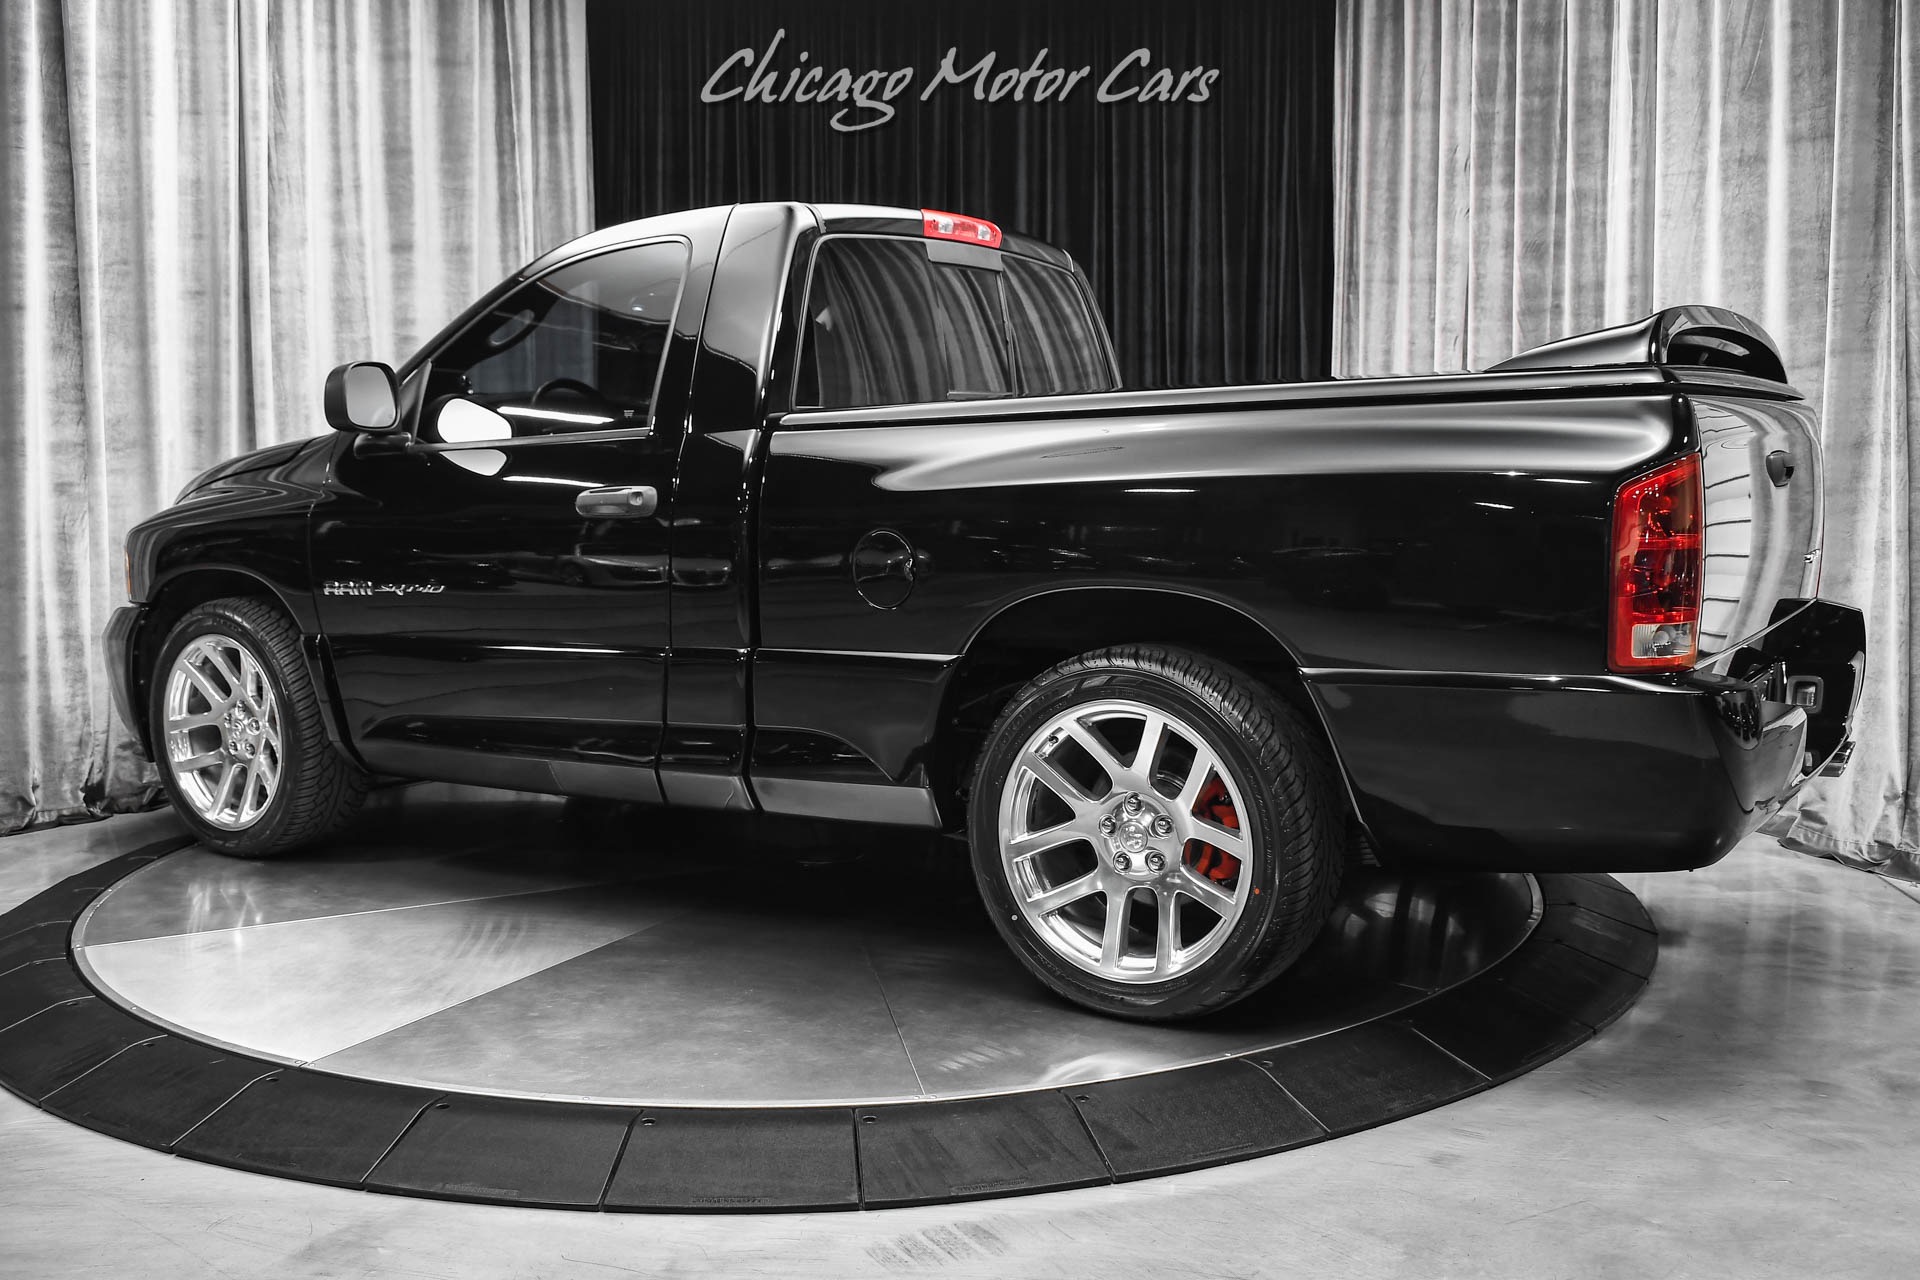 Used 2005 Dodge Ram 1500 SRT-10 Pickup 6-Speed Manual! Viper Powered 500 Engine! For Sale (Special Pricing) | Motor Stock #19527C